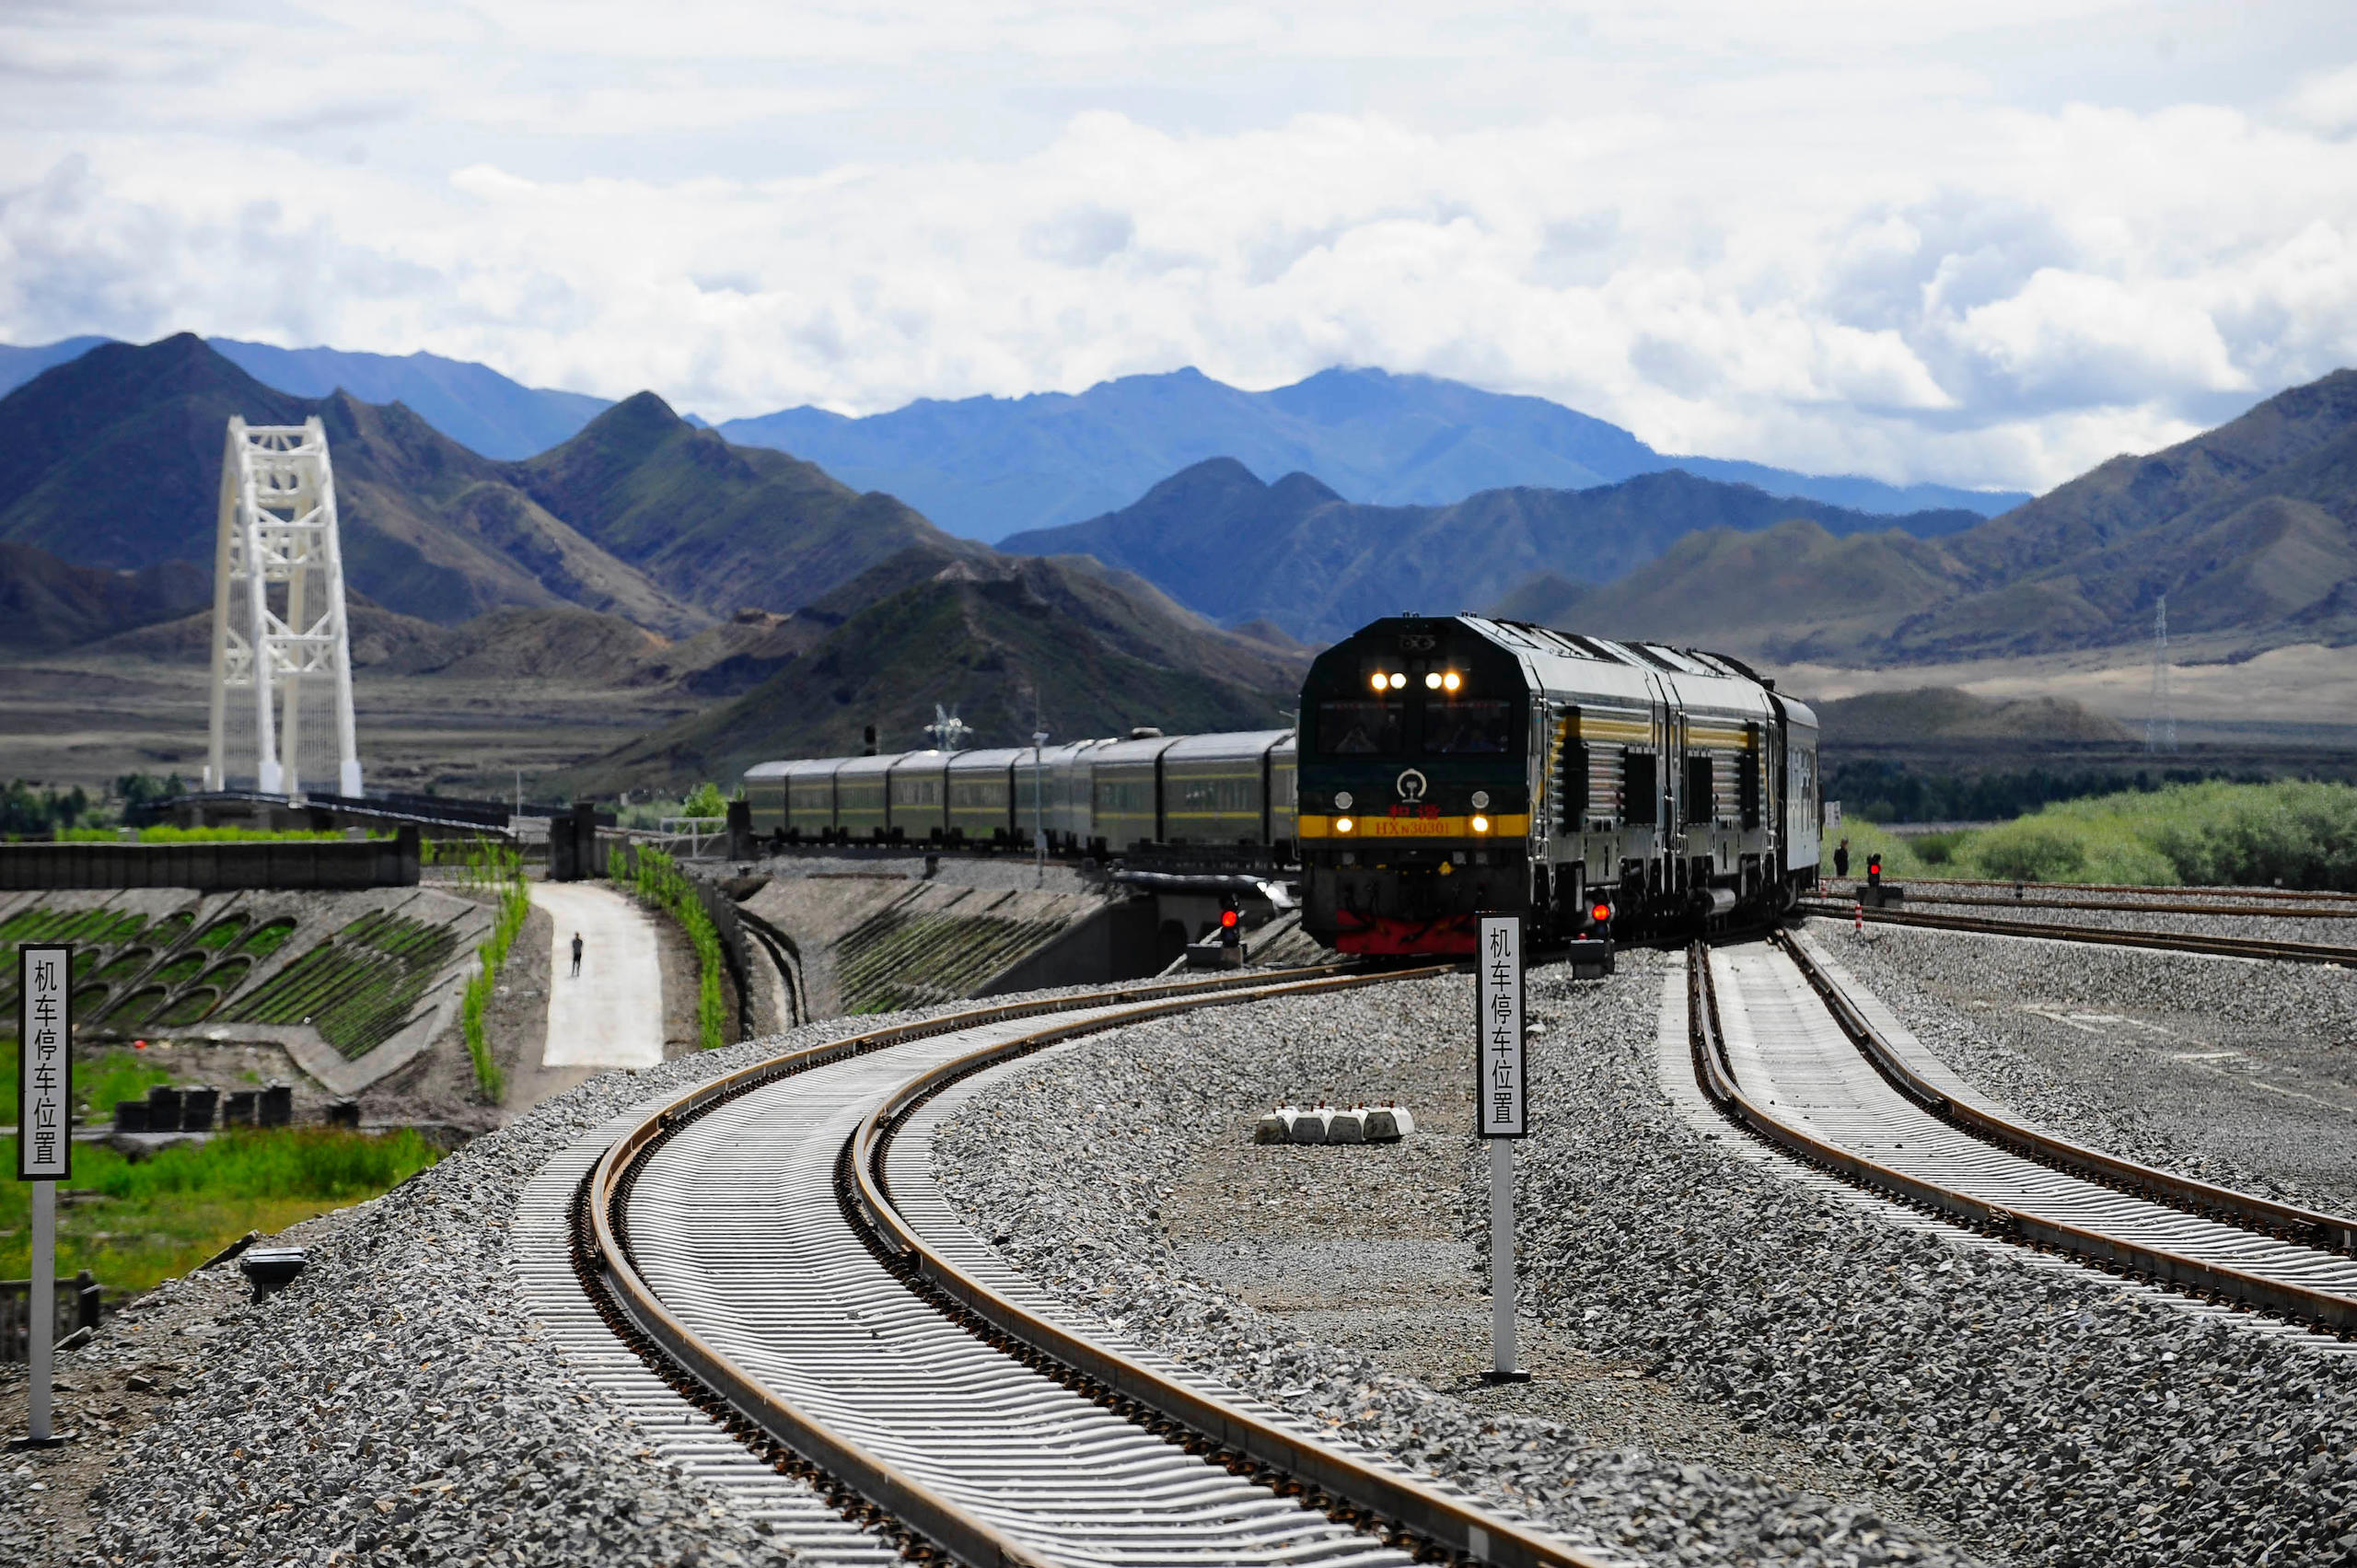 The first passenger train from Lhasa to Xigaze heads into Xigaze railway station, in southwest China, in August 2014.